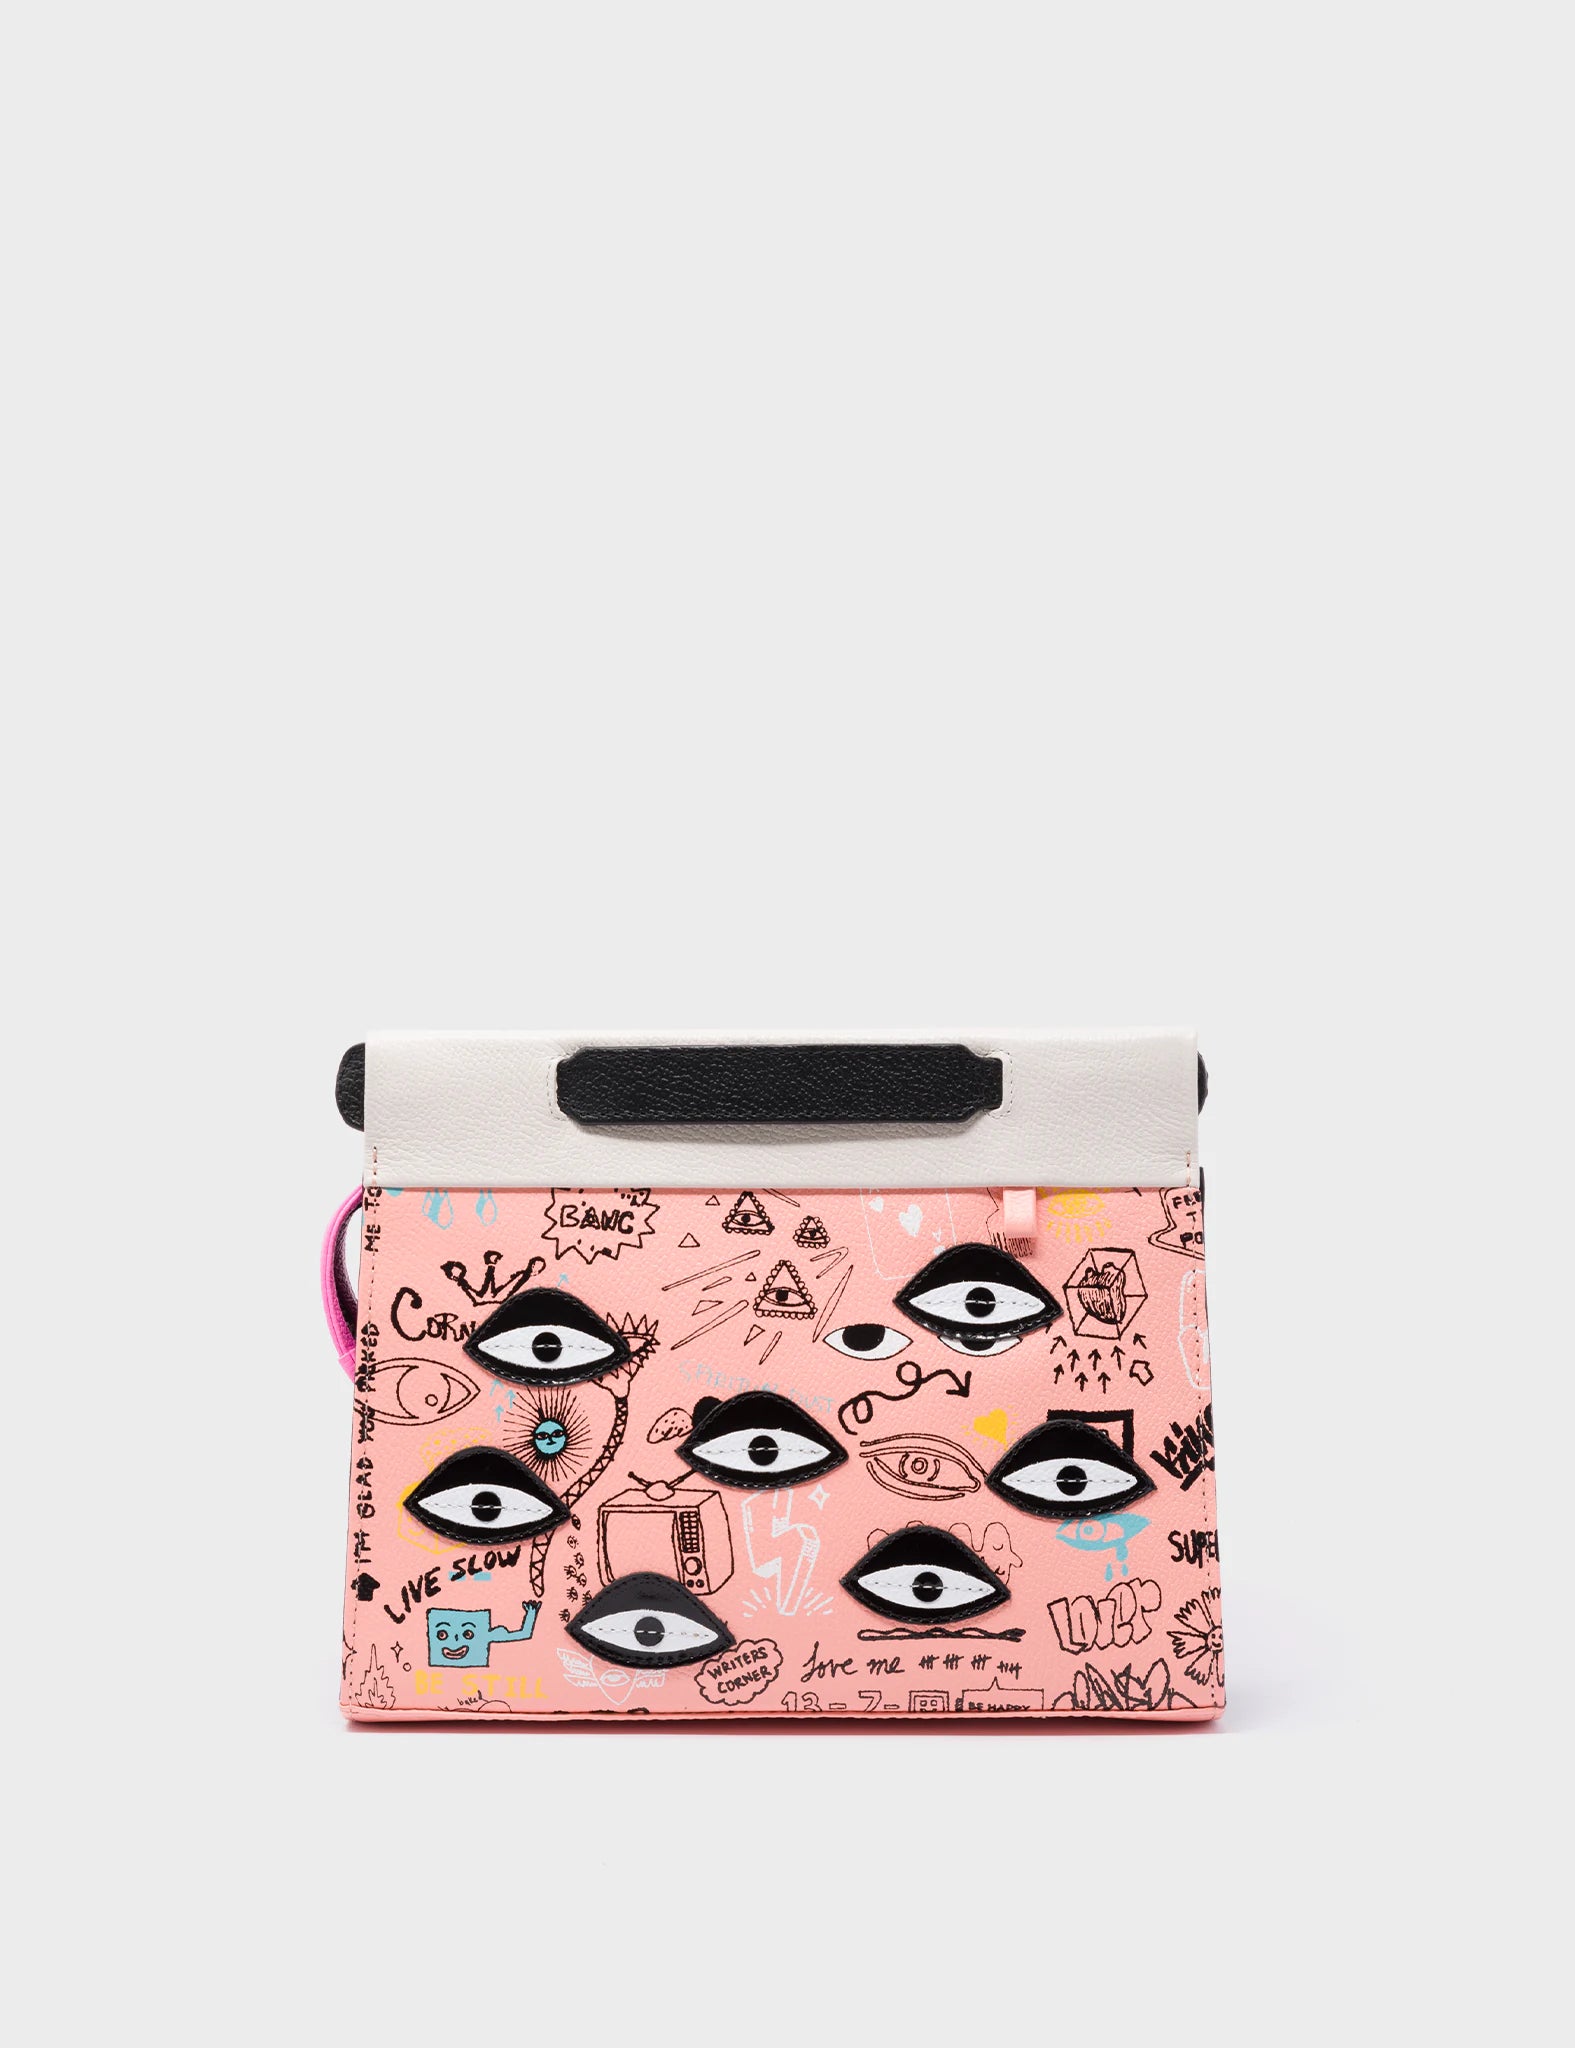 Vali Crossbody Small Rosa Leather Bag - Urban Doodles Print and Eyes Applique - Front View